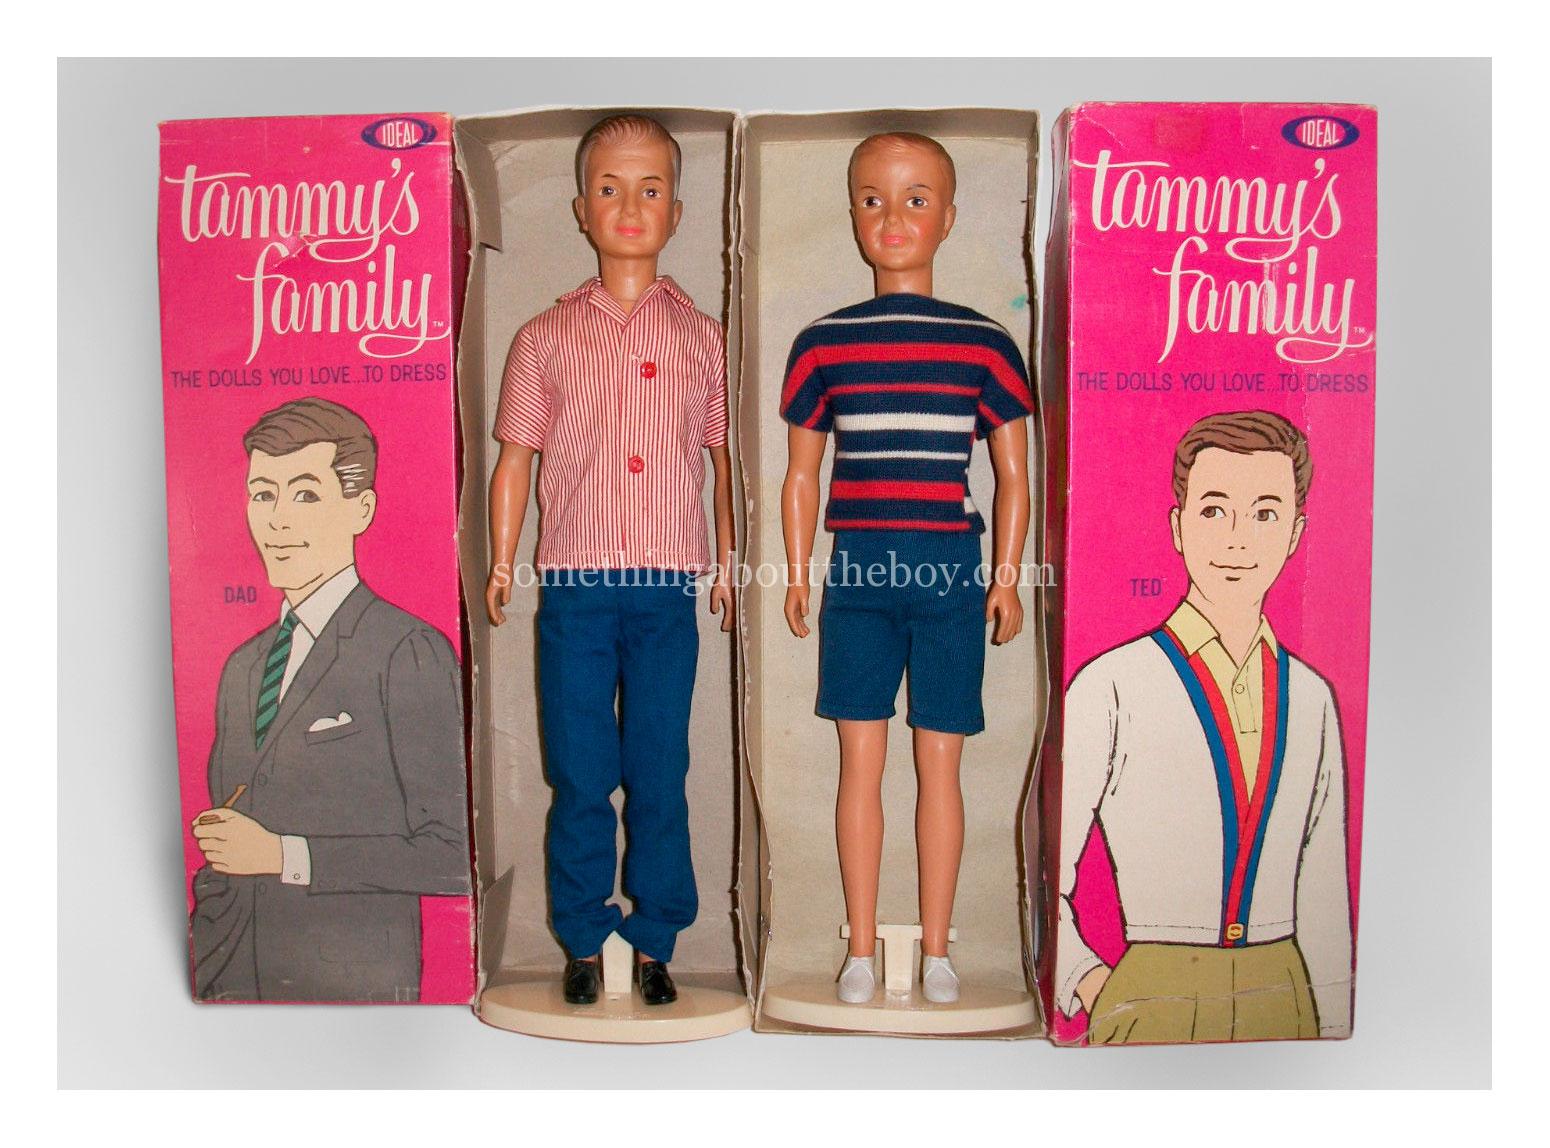 Tammy's Family Dad and Ted dolls in original packaging